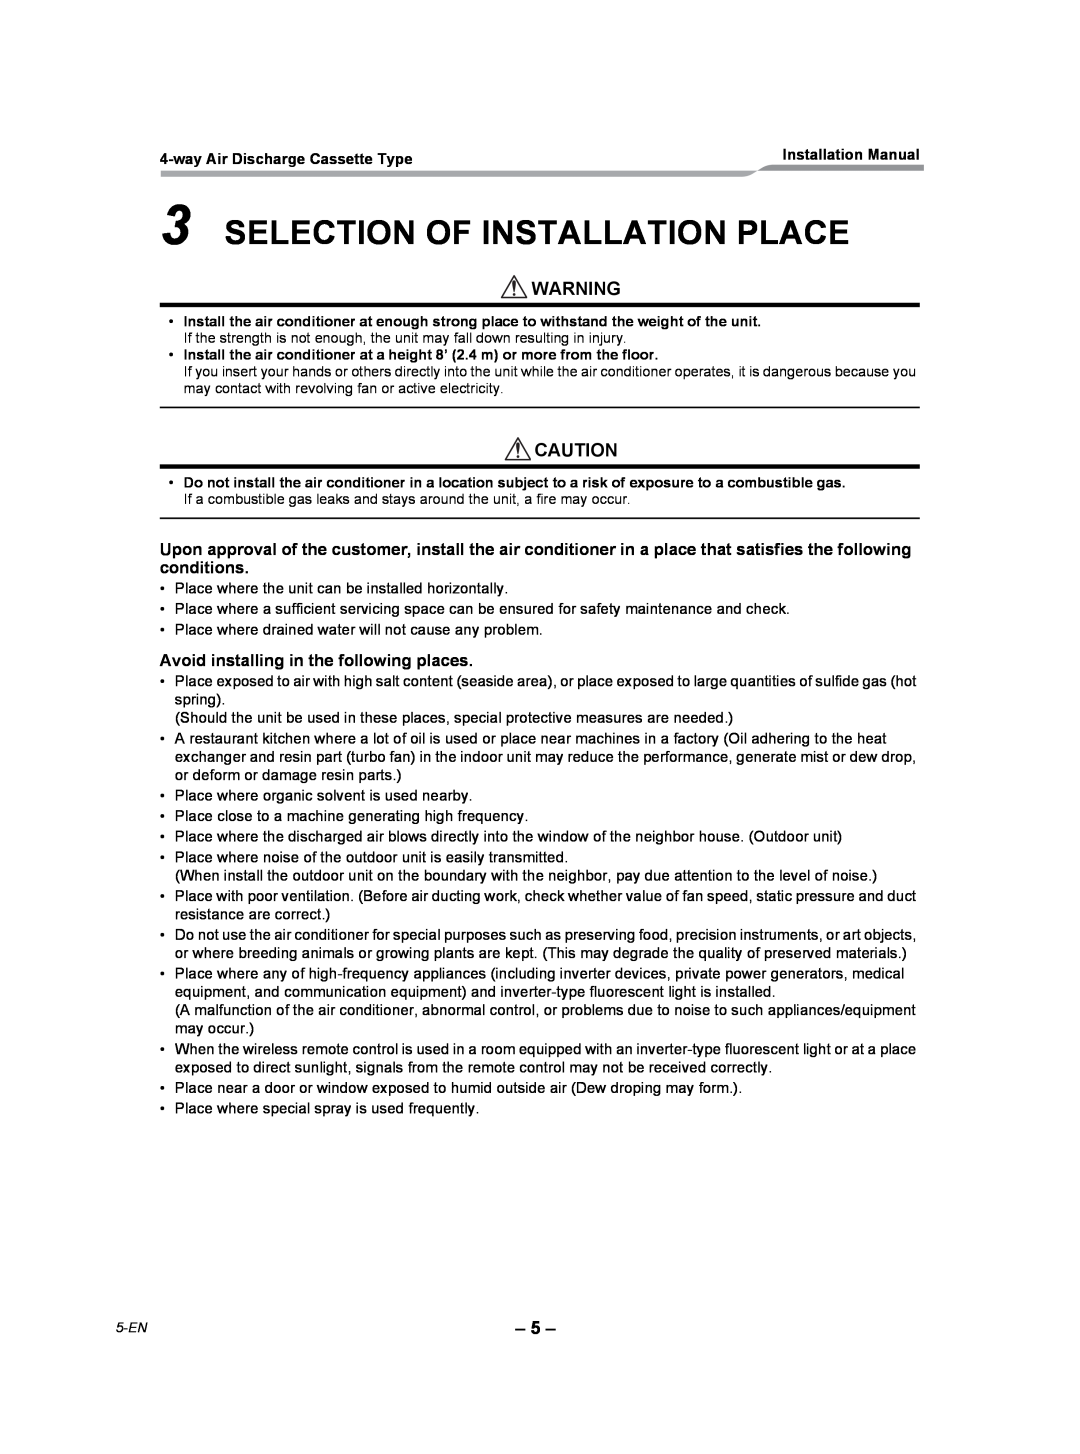 Toshiba RAV-SP180UT-UL installation manual Selection Of Installation Place, Avoid installing in the following places 